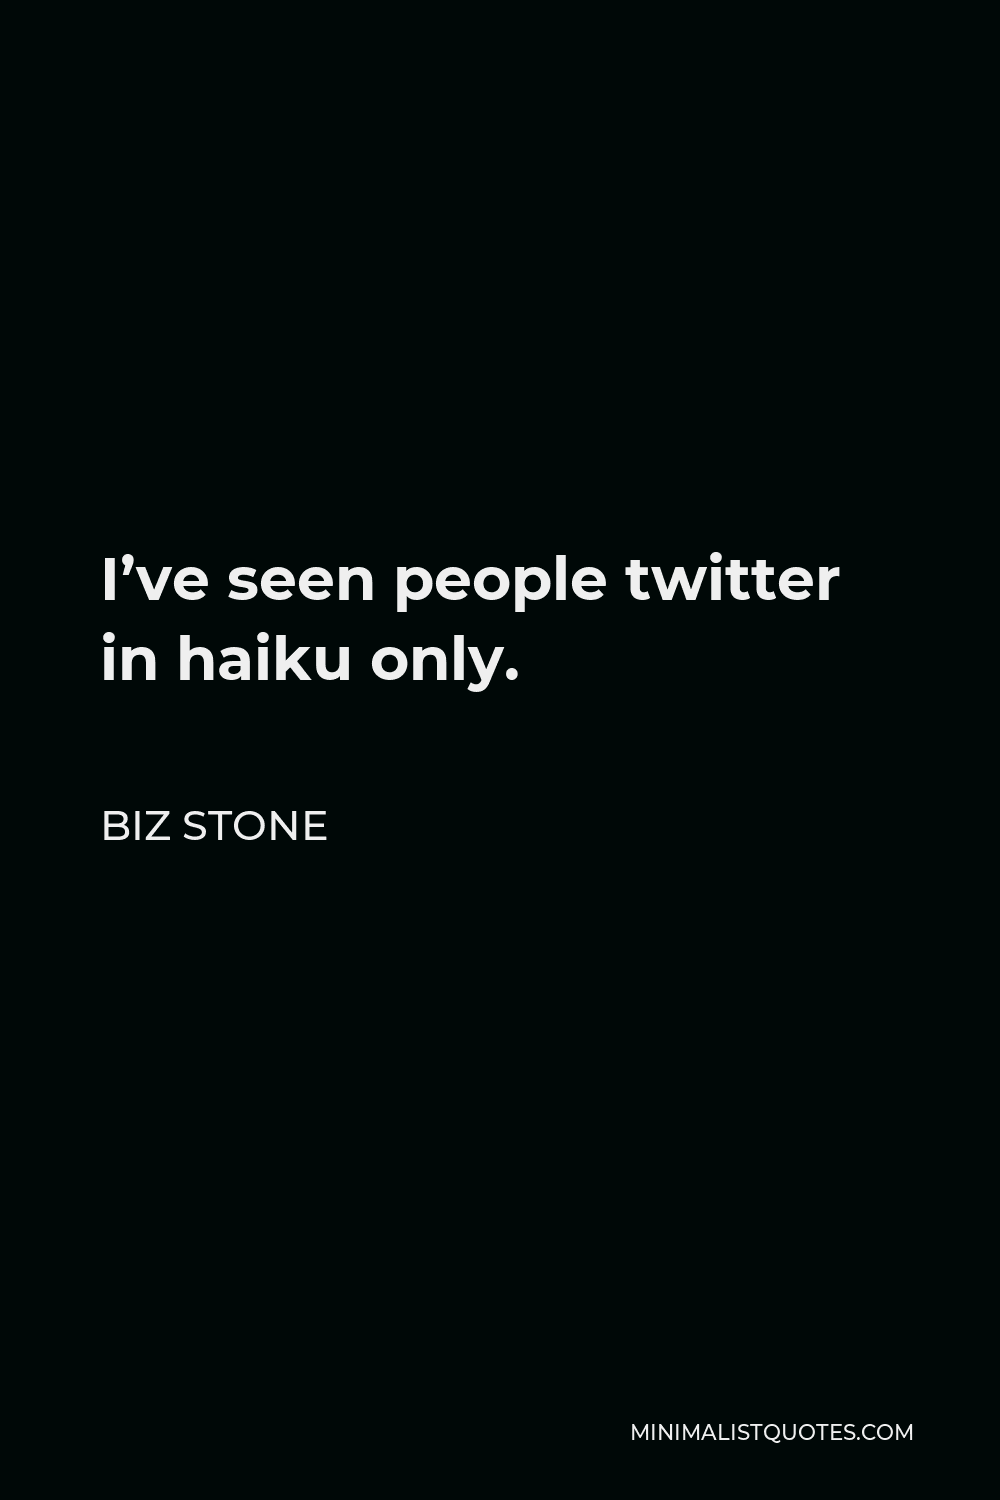 Biz Stone Quote - I’ve seen people twitter in haiku only.